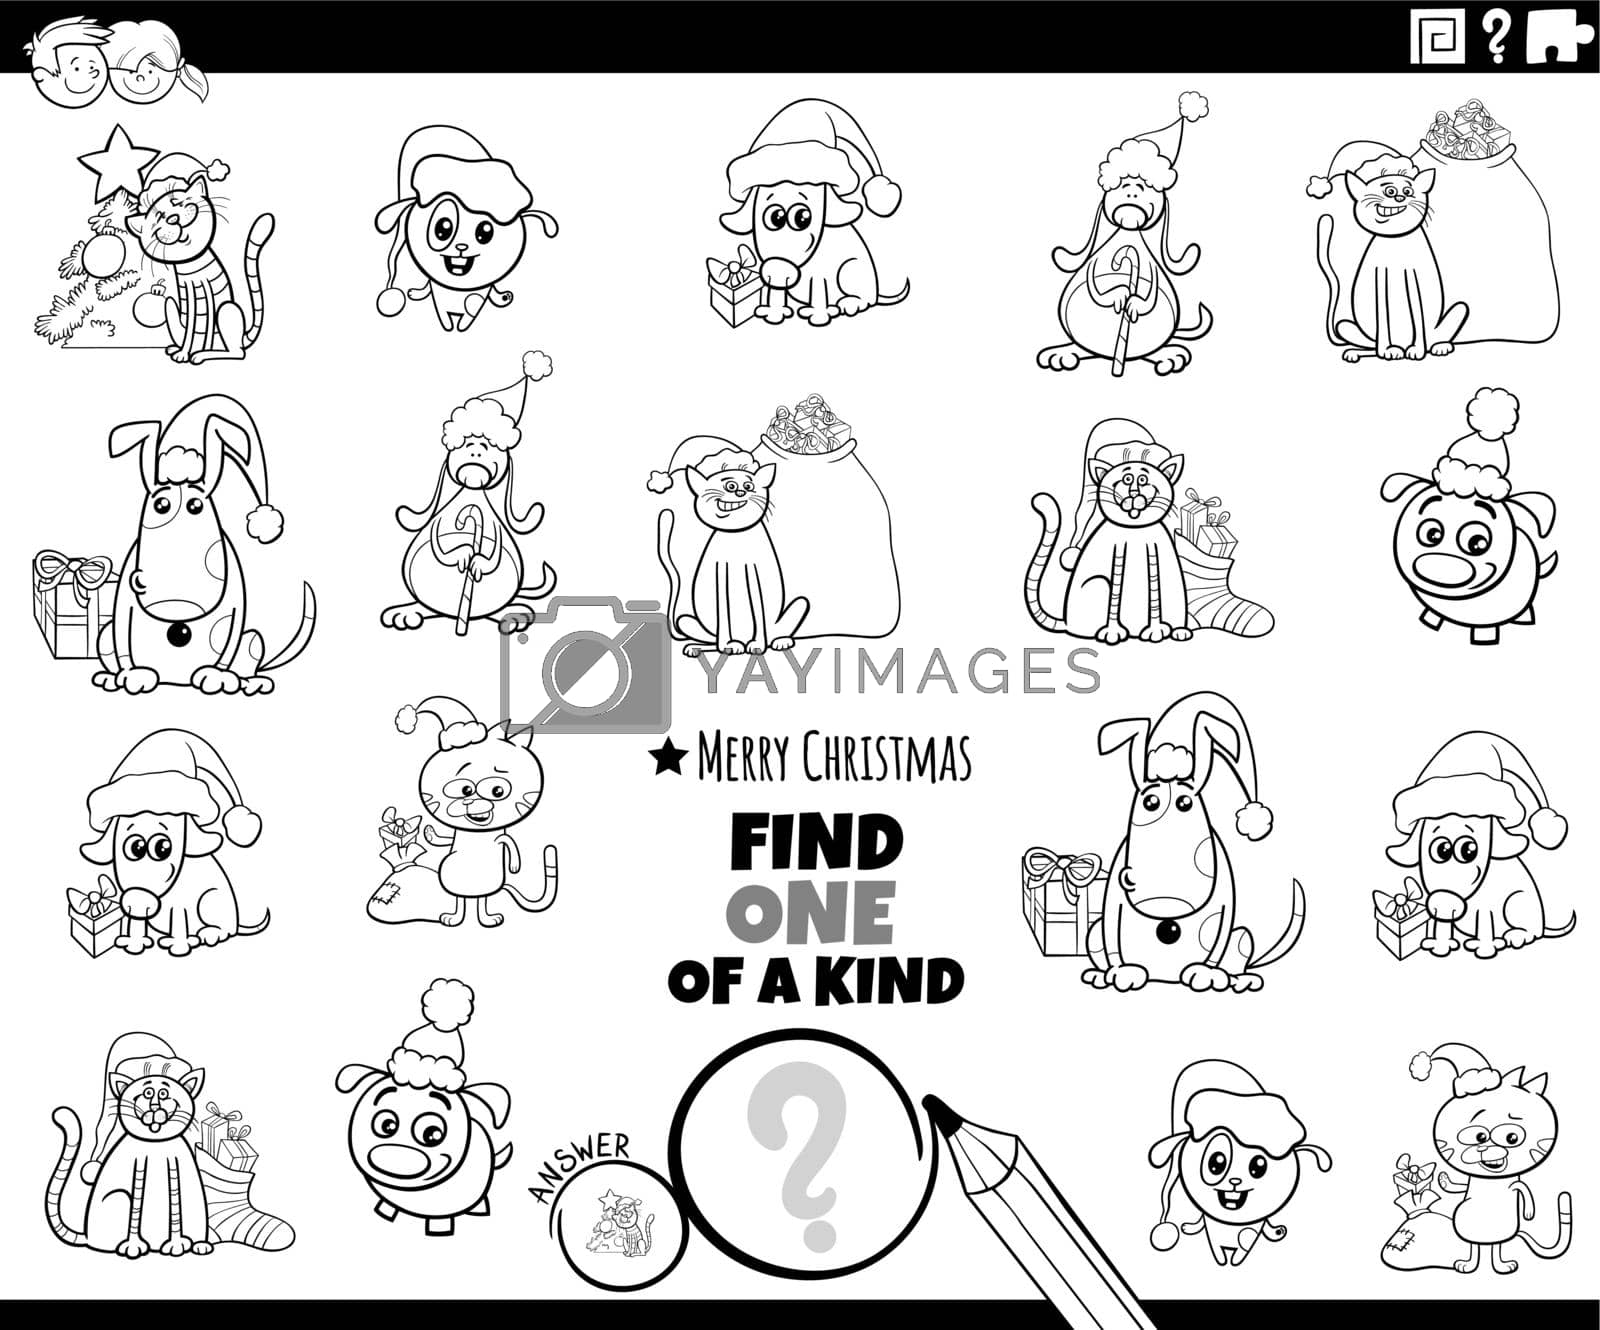 Black and white cartoon illustration of find one of a kind picture educational game with pets characters on Christmas time coloring book page